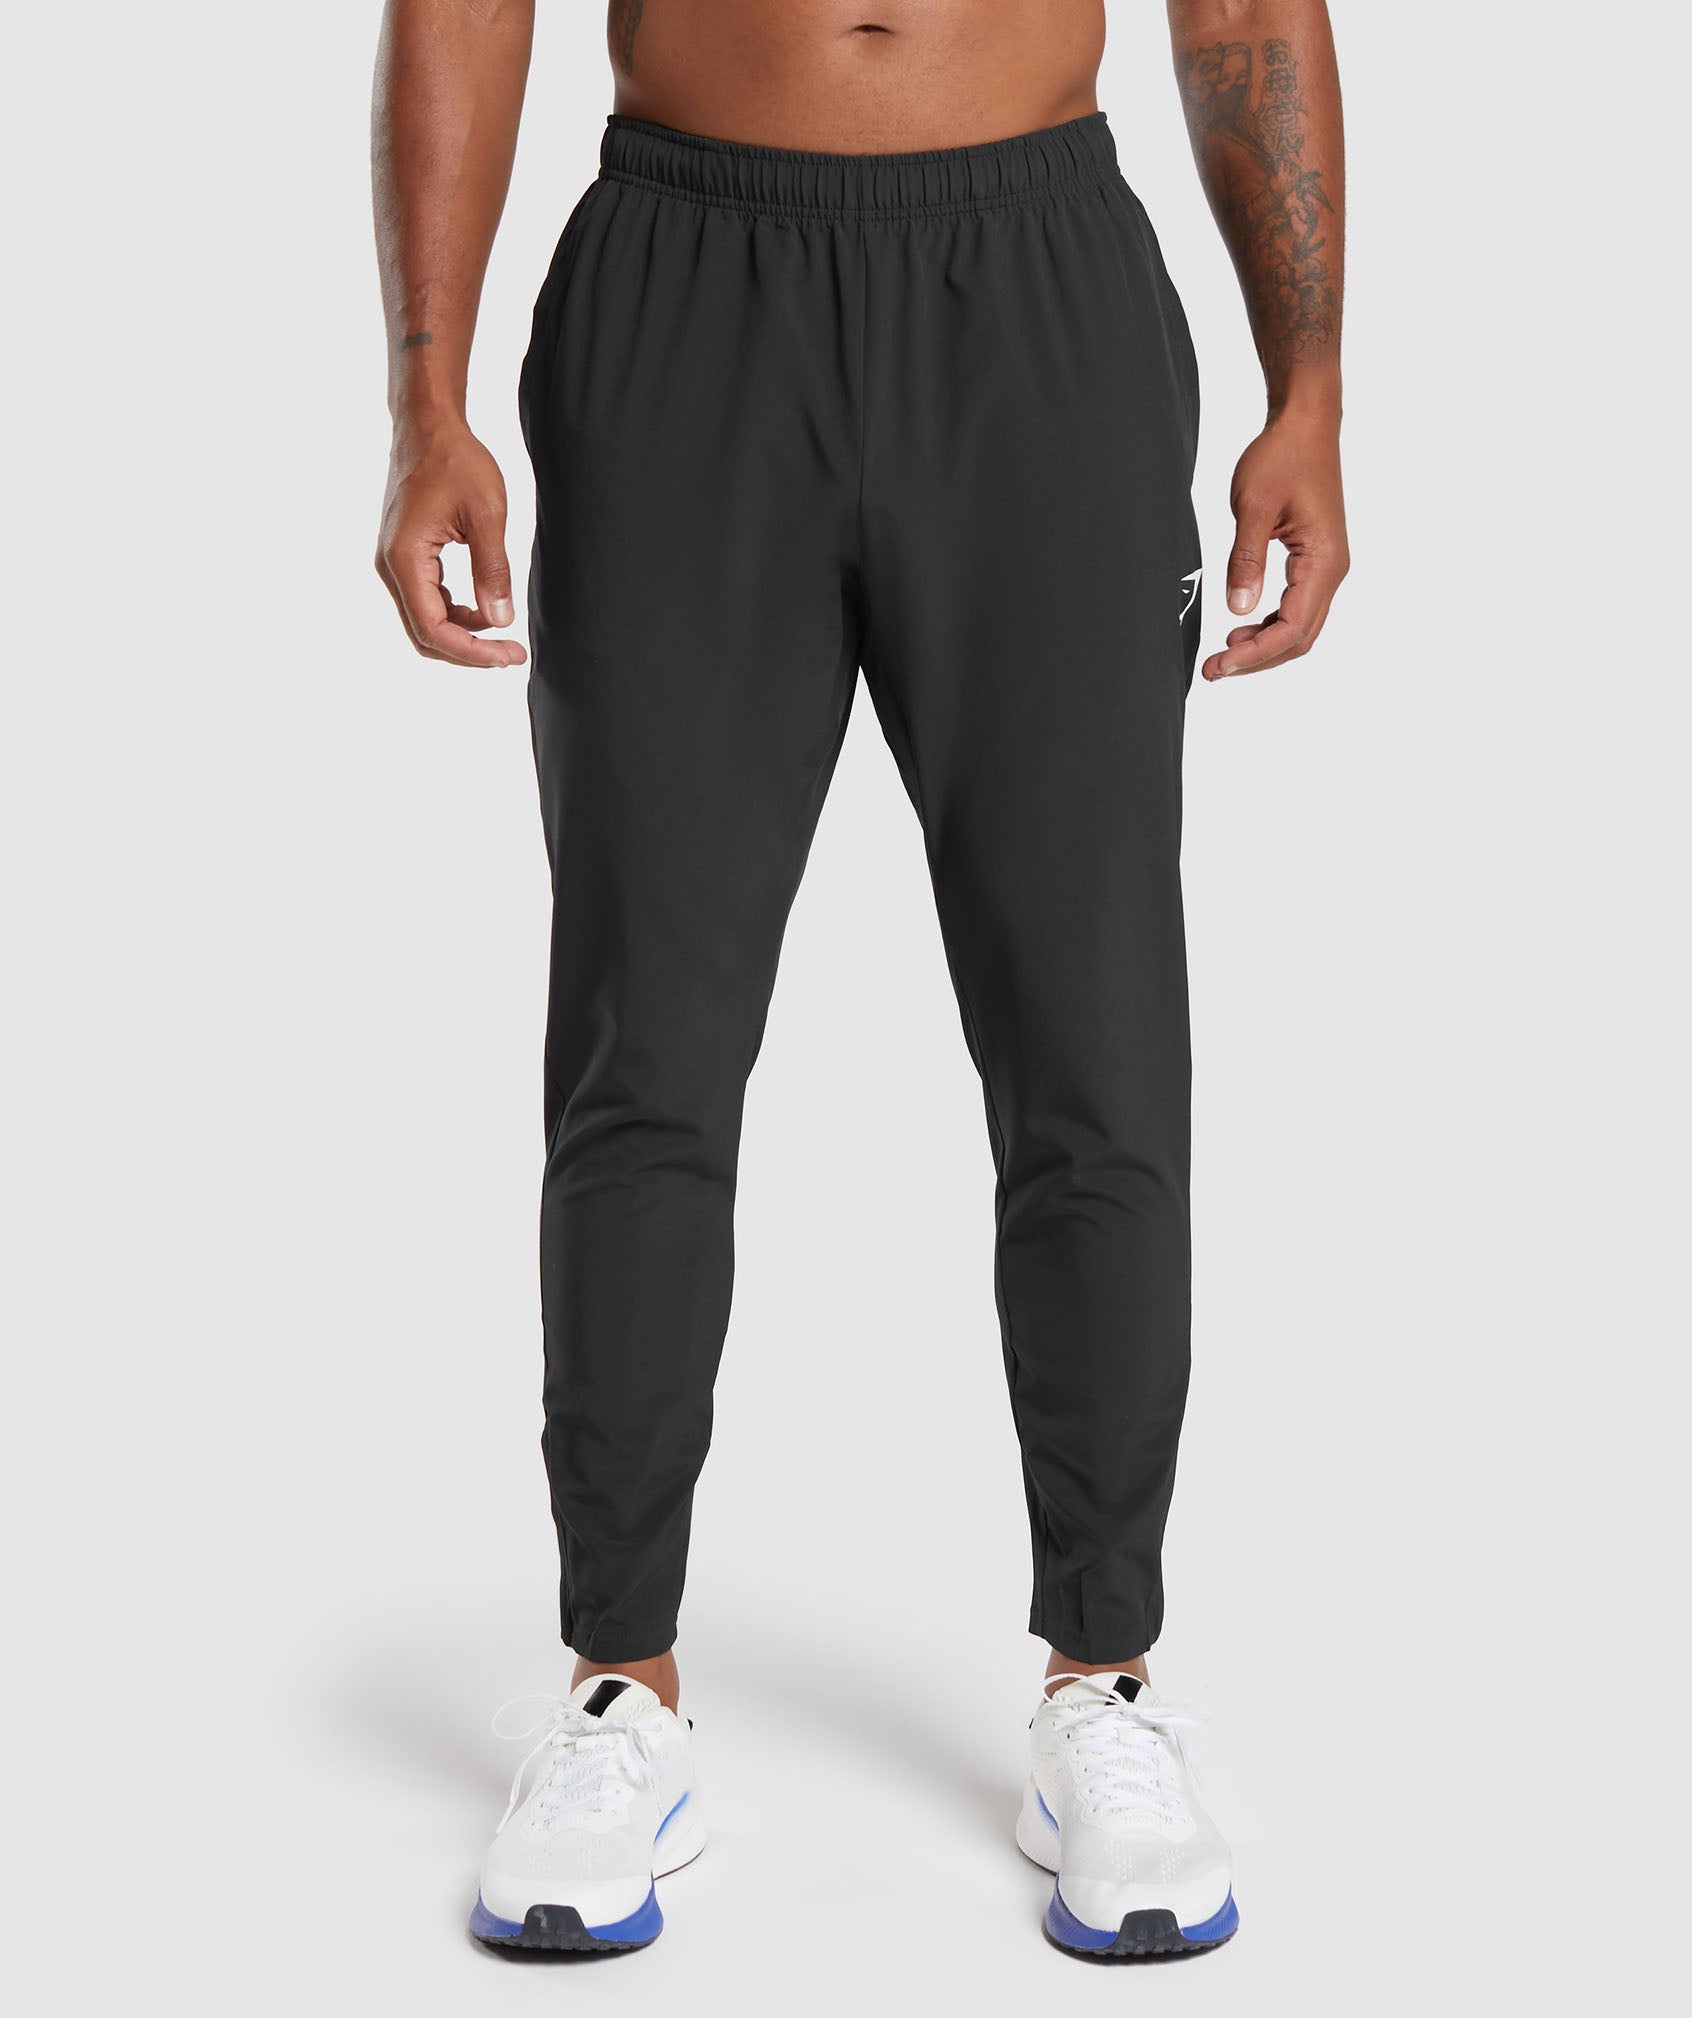 Arrival Woven Joggers